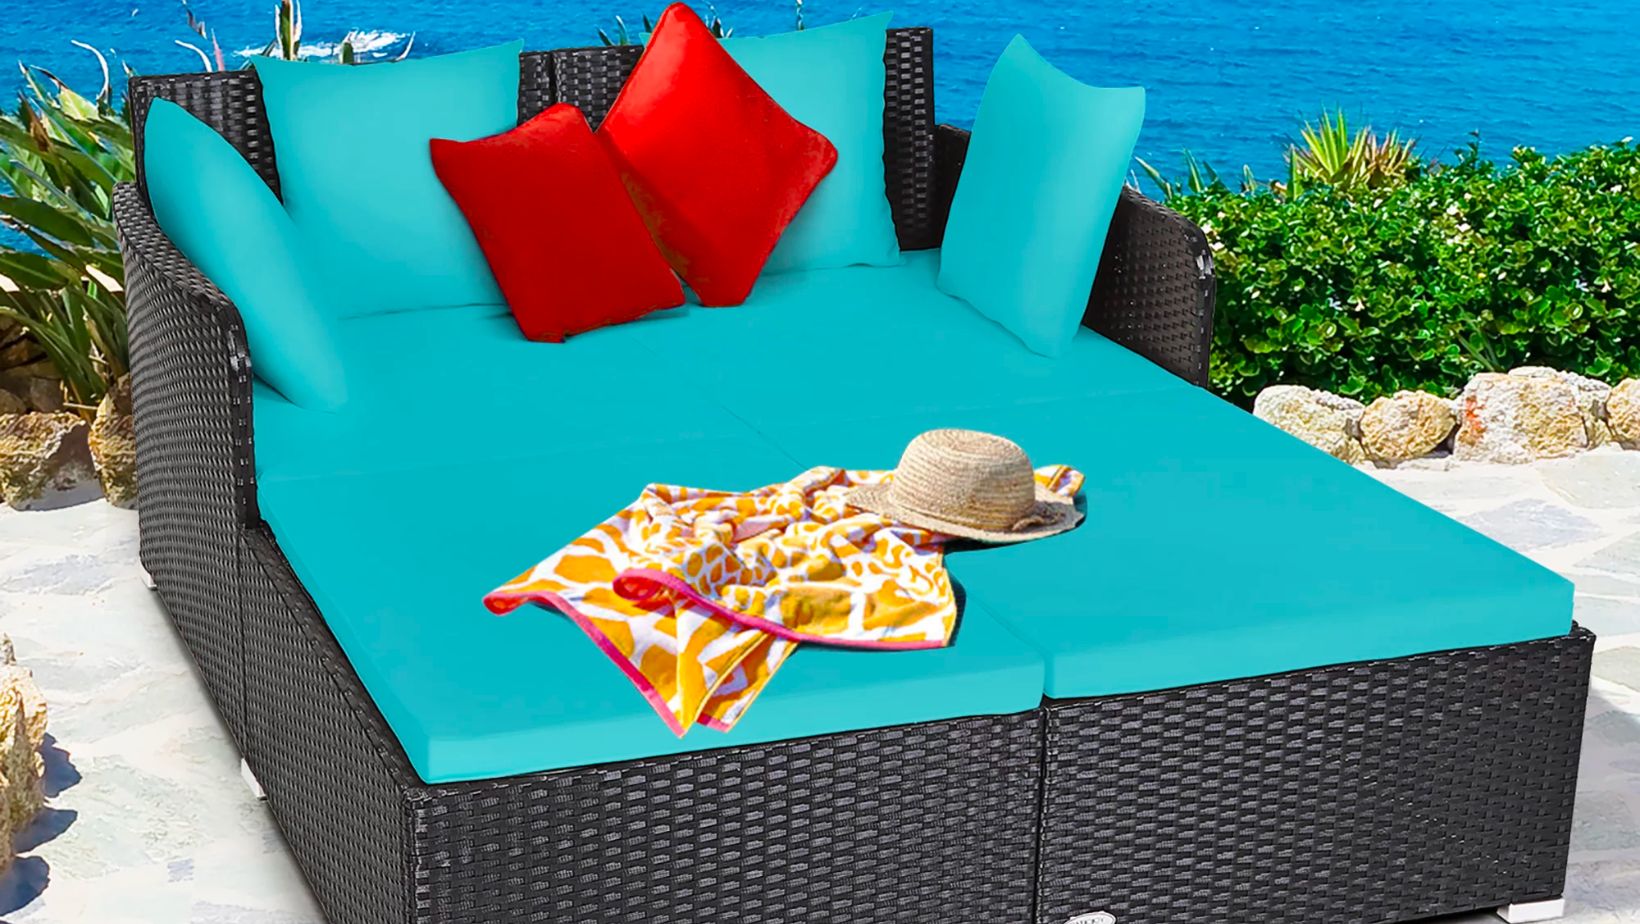 Outdoor Patio Daybed at Walmart